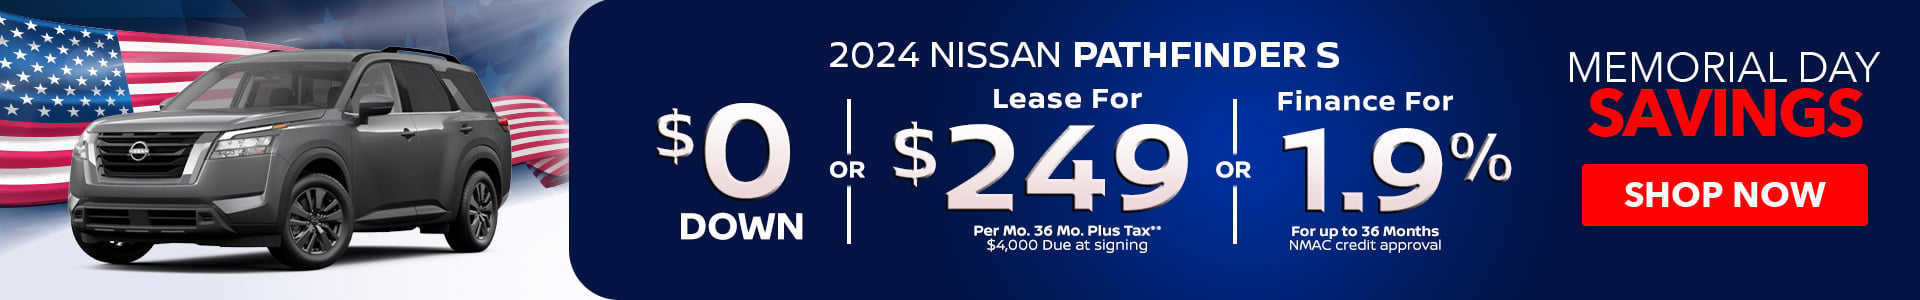 2024 Nissan Pathfinder - Lease for $249